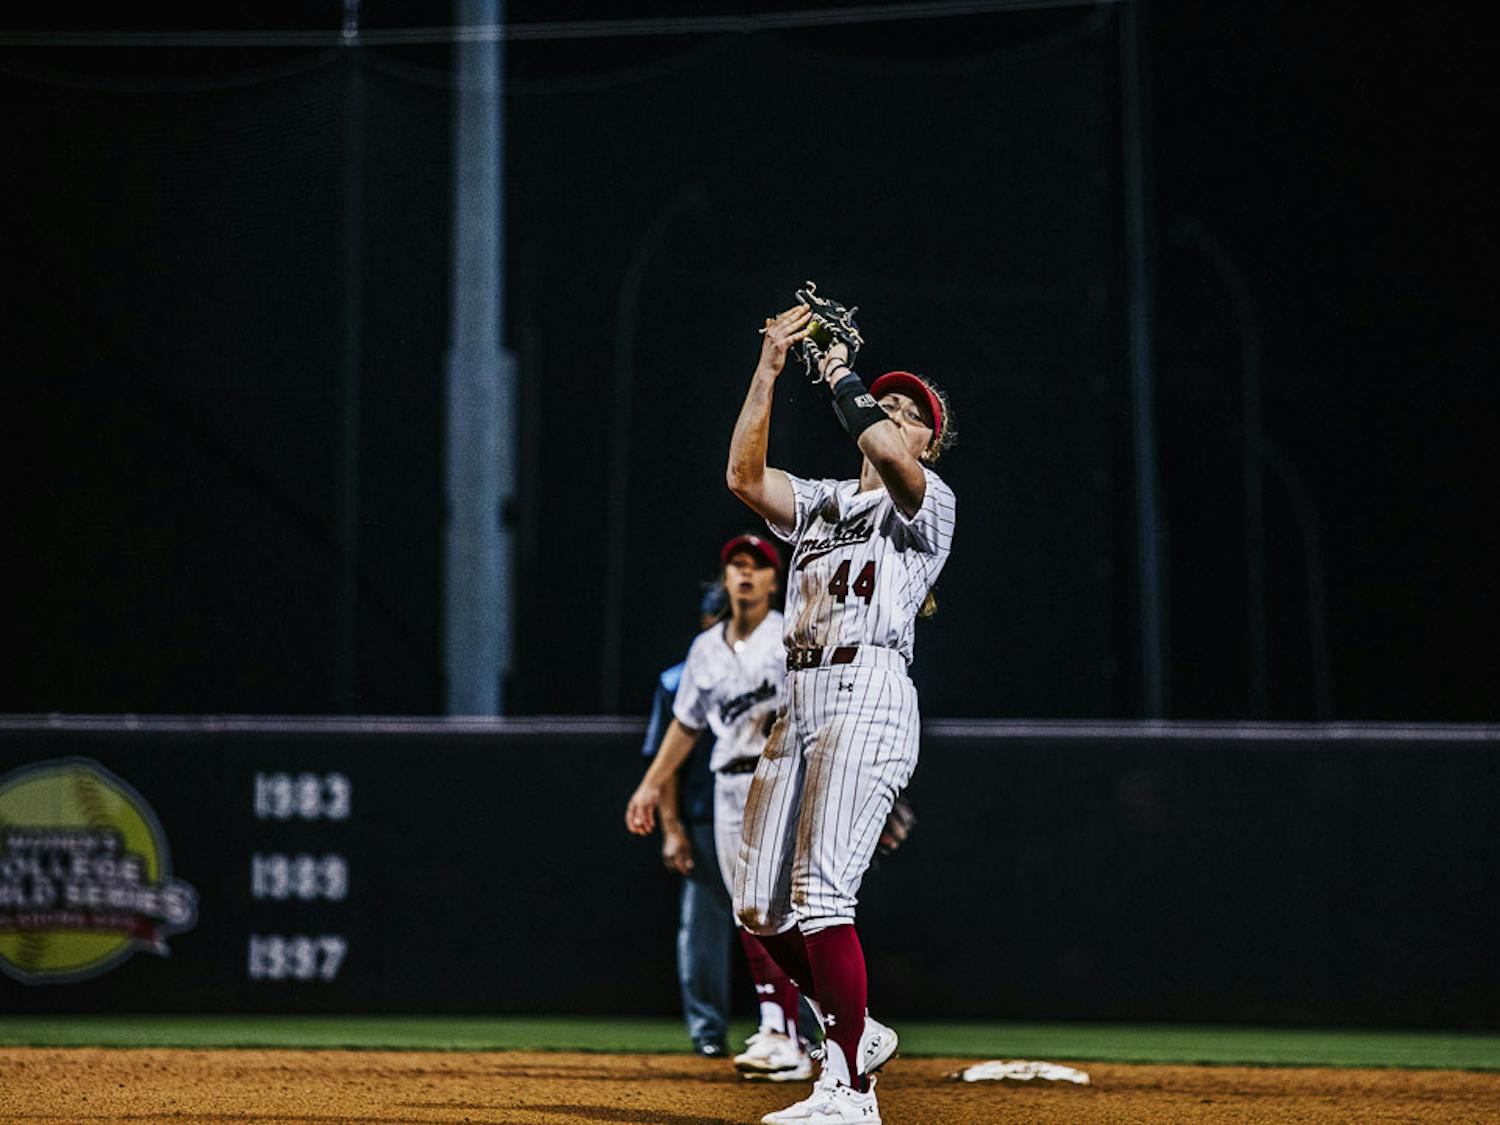 Sophomore infielder Emma Sellers catches a fly ball during the fifth inning of the South Carolina vs. College of Charleston game at Carolina Softball Stadium at Beckham Field on February 15, 2023. The Gamecocks beat the Cougars 8-0.&nbsp;